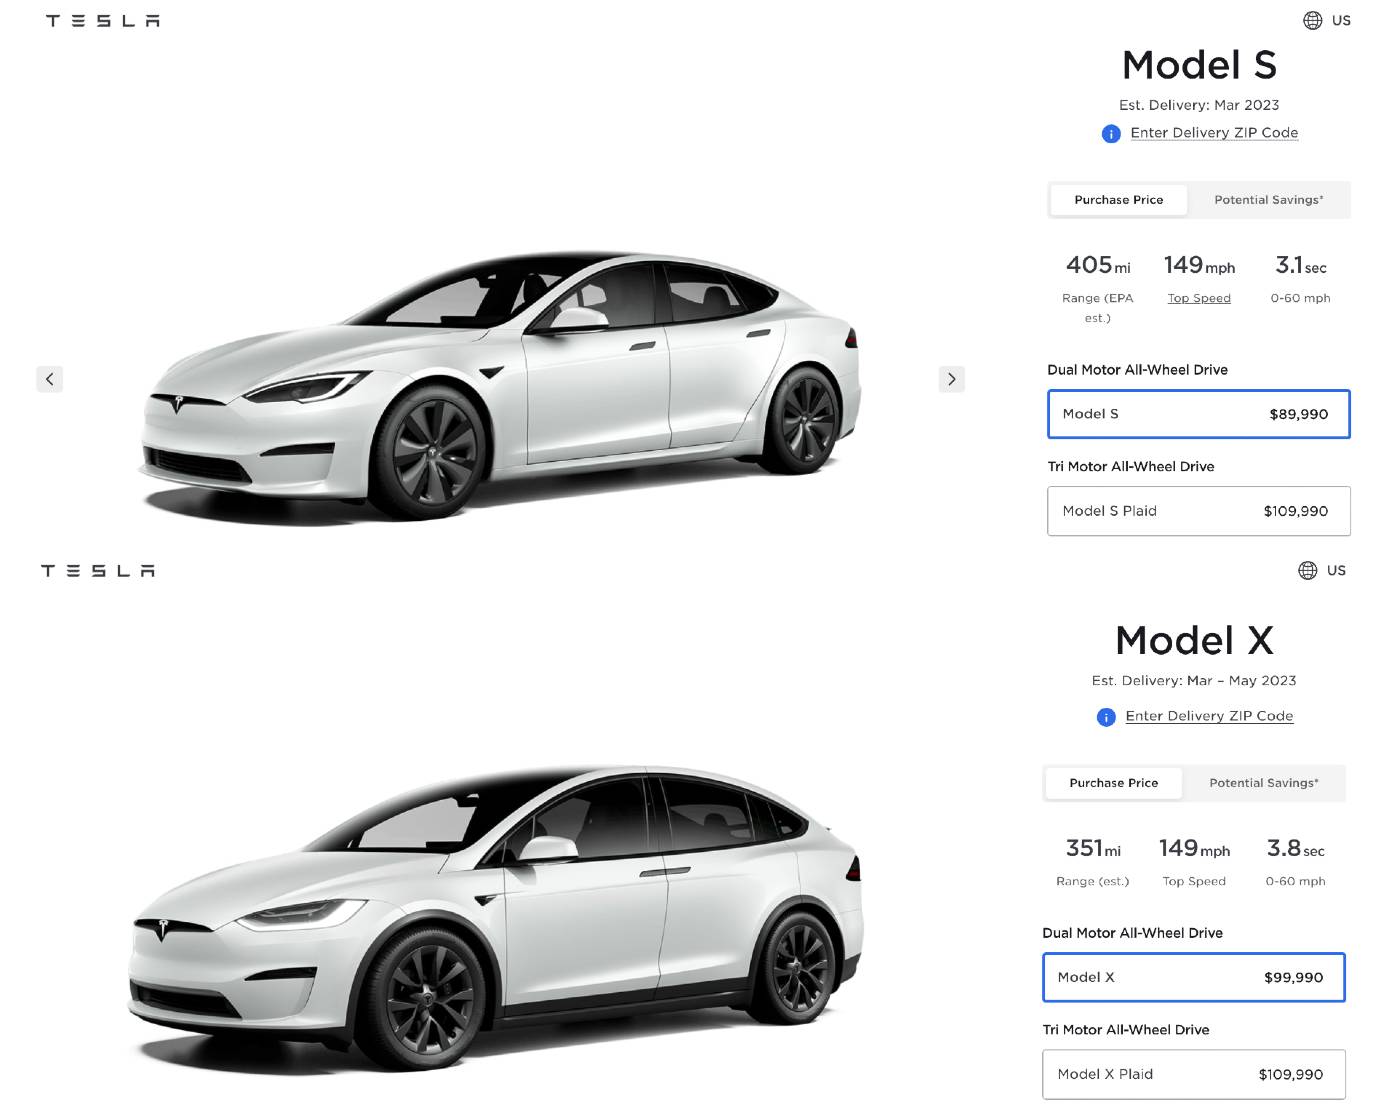 Tesla Model X and Model S get price reduction in the United States